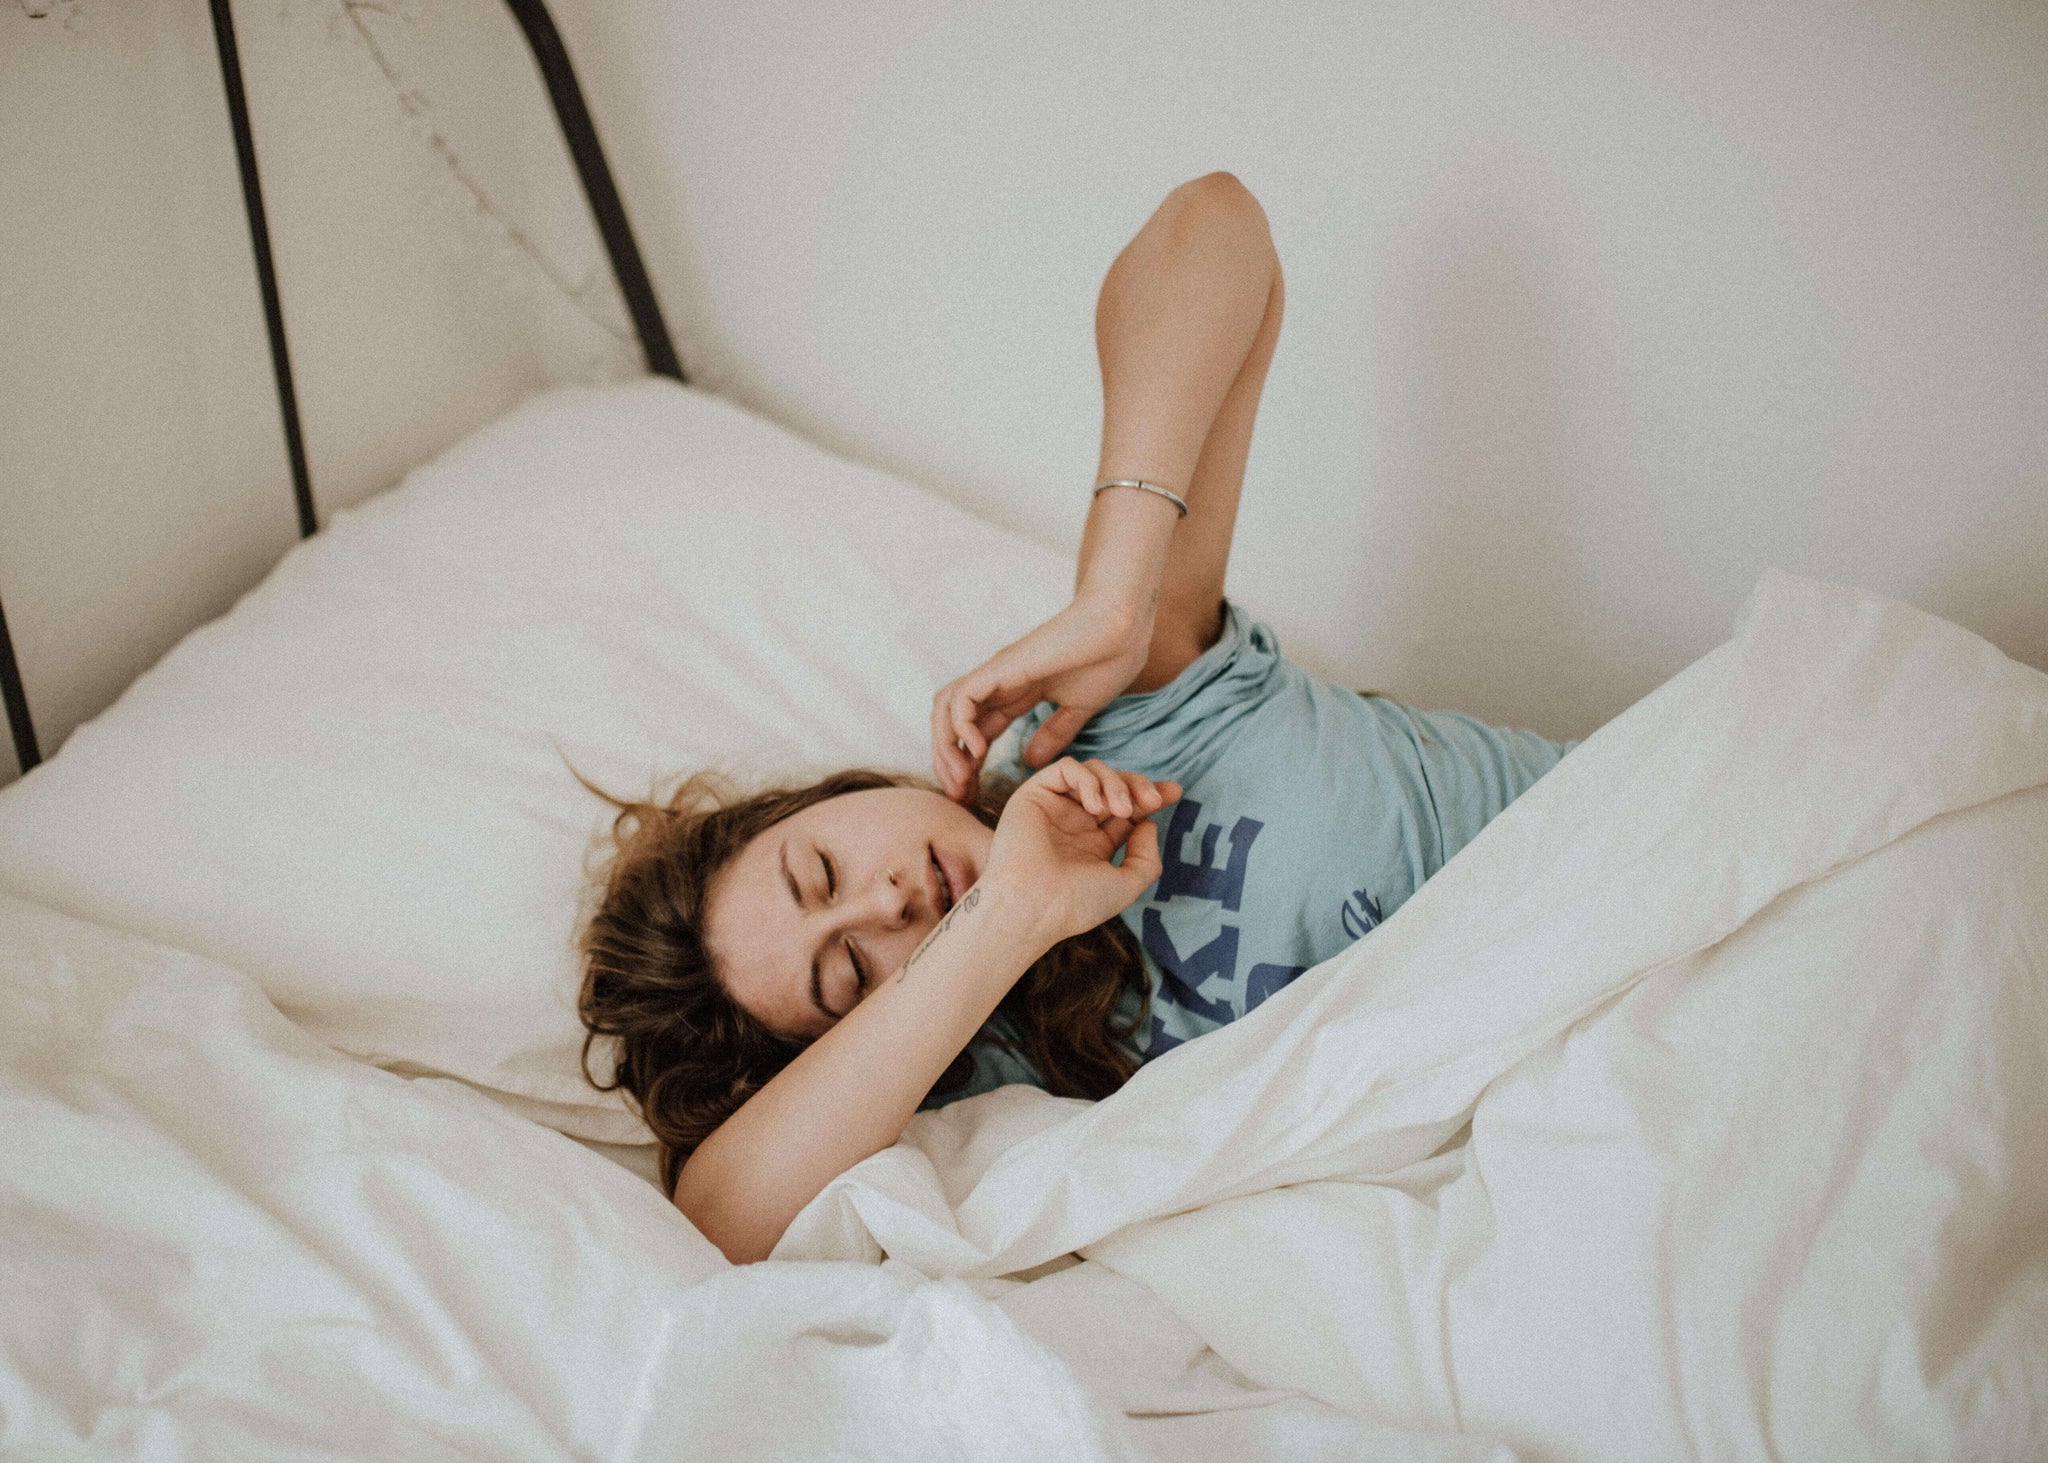 Vitamin D and a great night’s sleep - what is the connection?